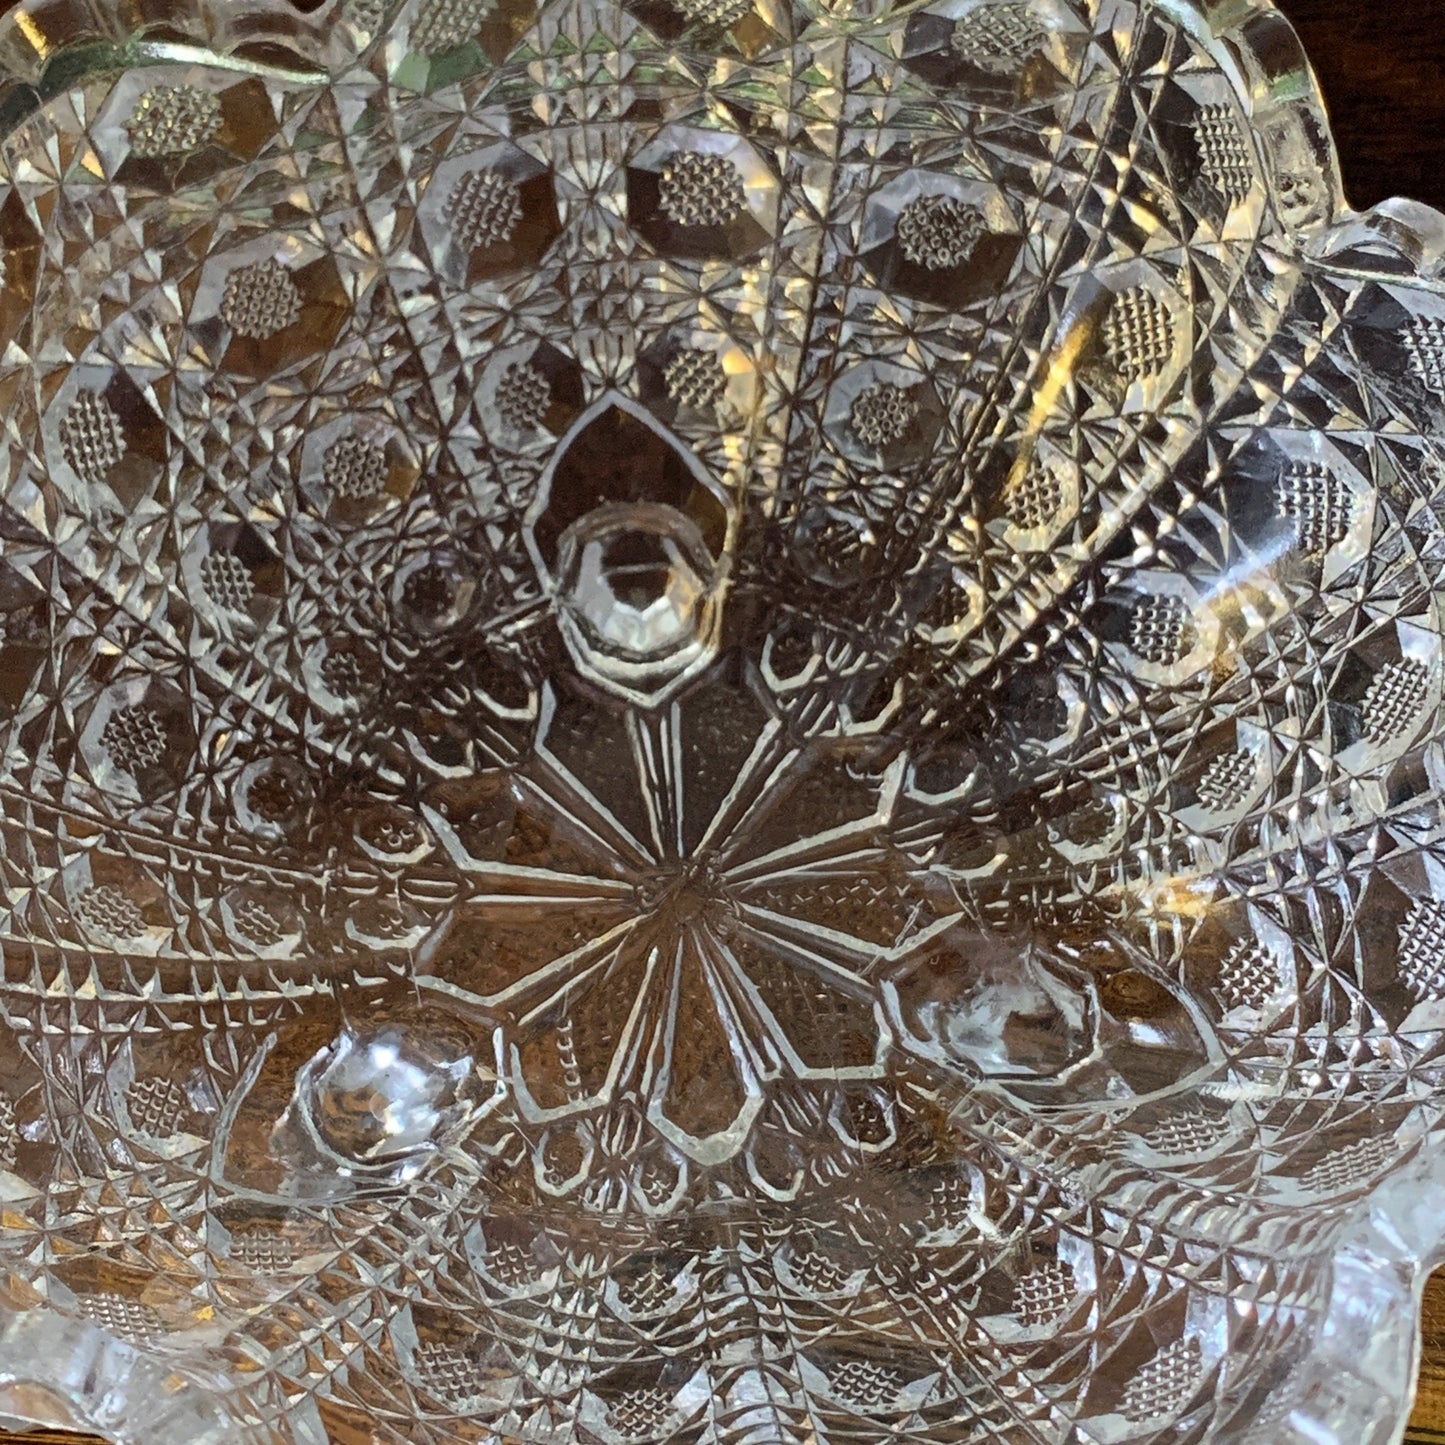 EAPG Pressed Glass Bowl with Crosshatched Hexagon Pattern